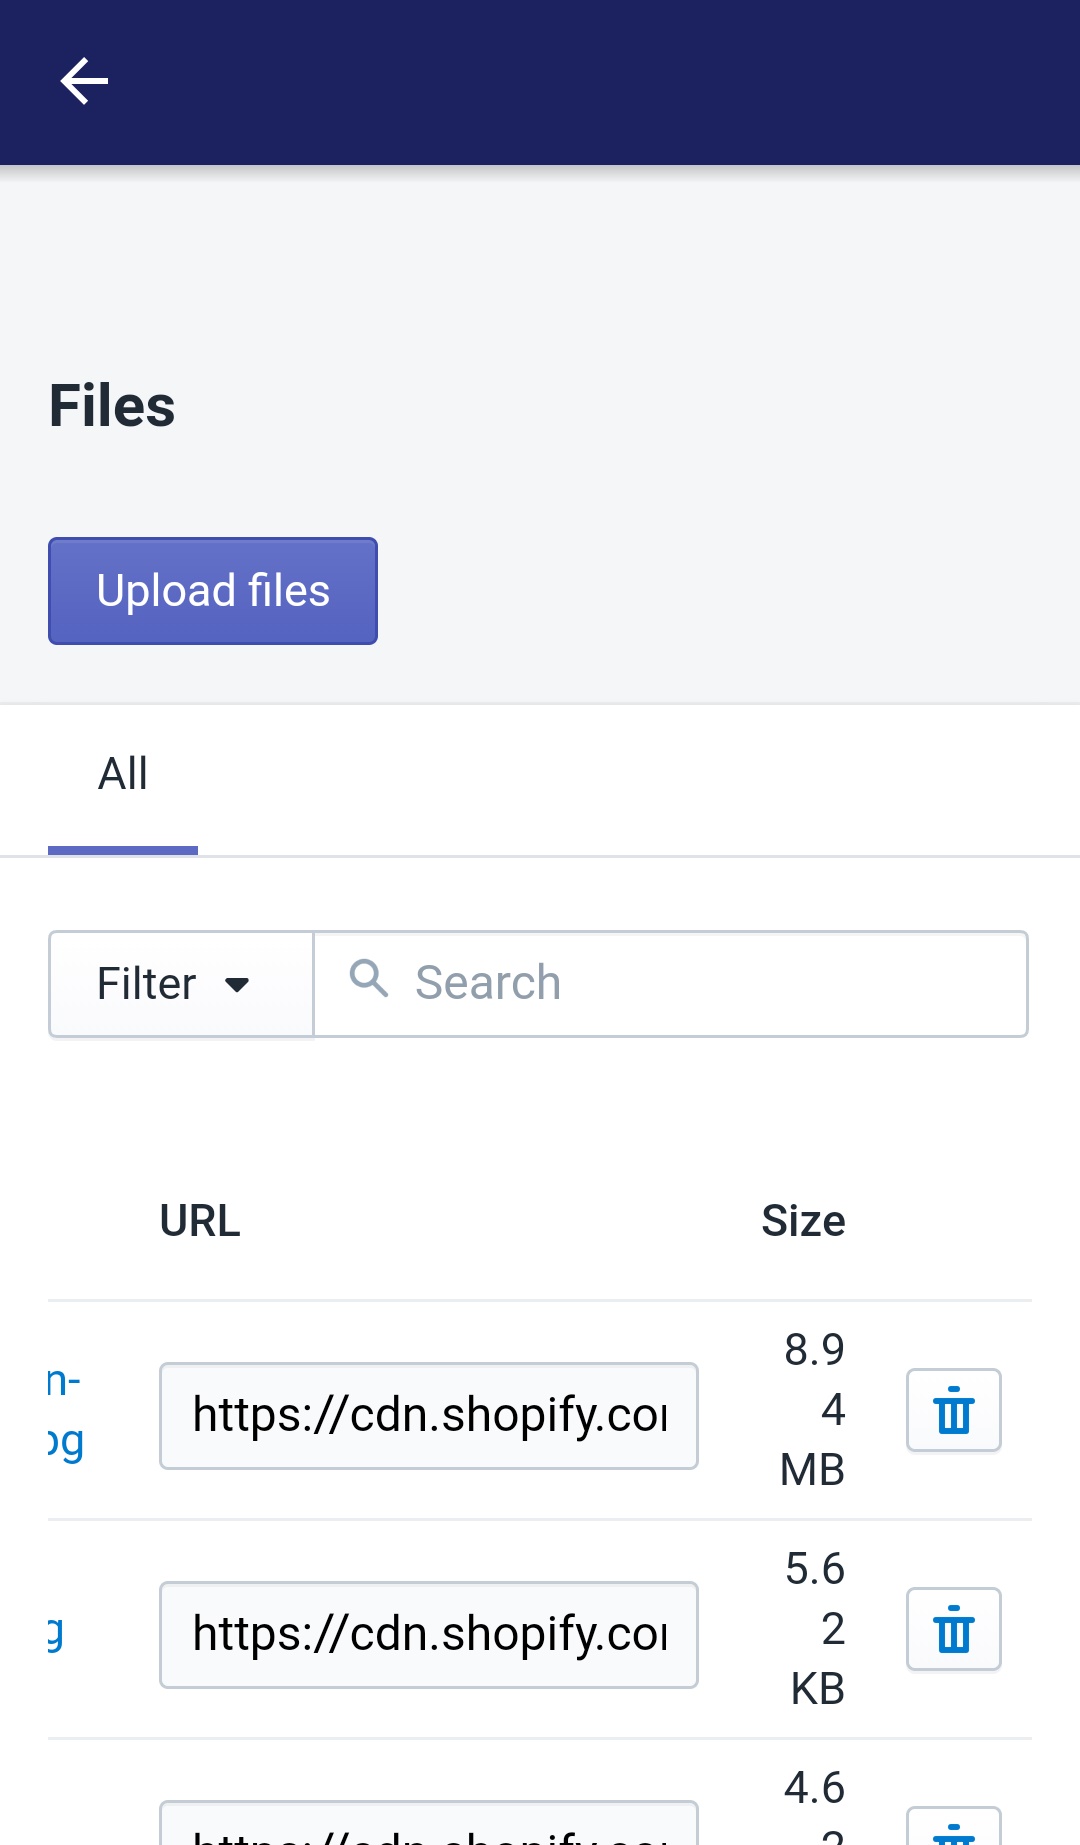 How to Delete a File on Shopify in 3 Easy Steps